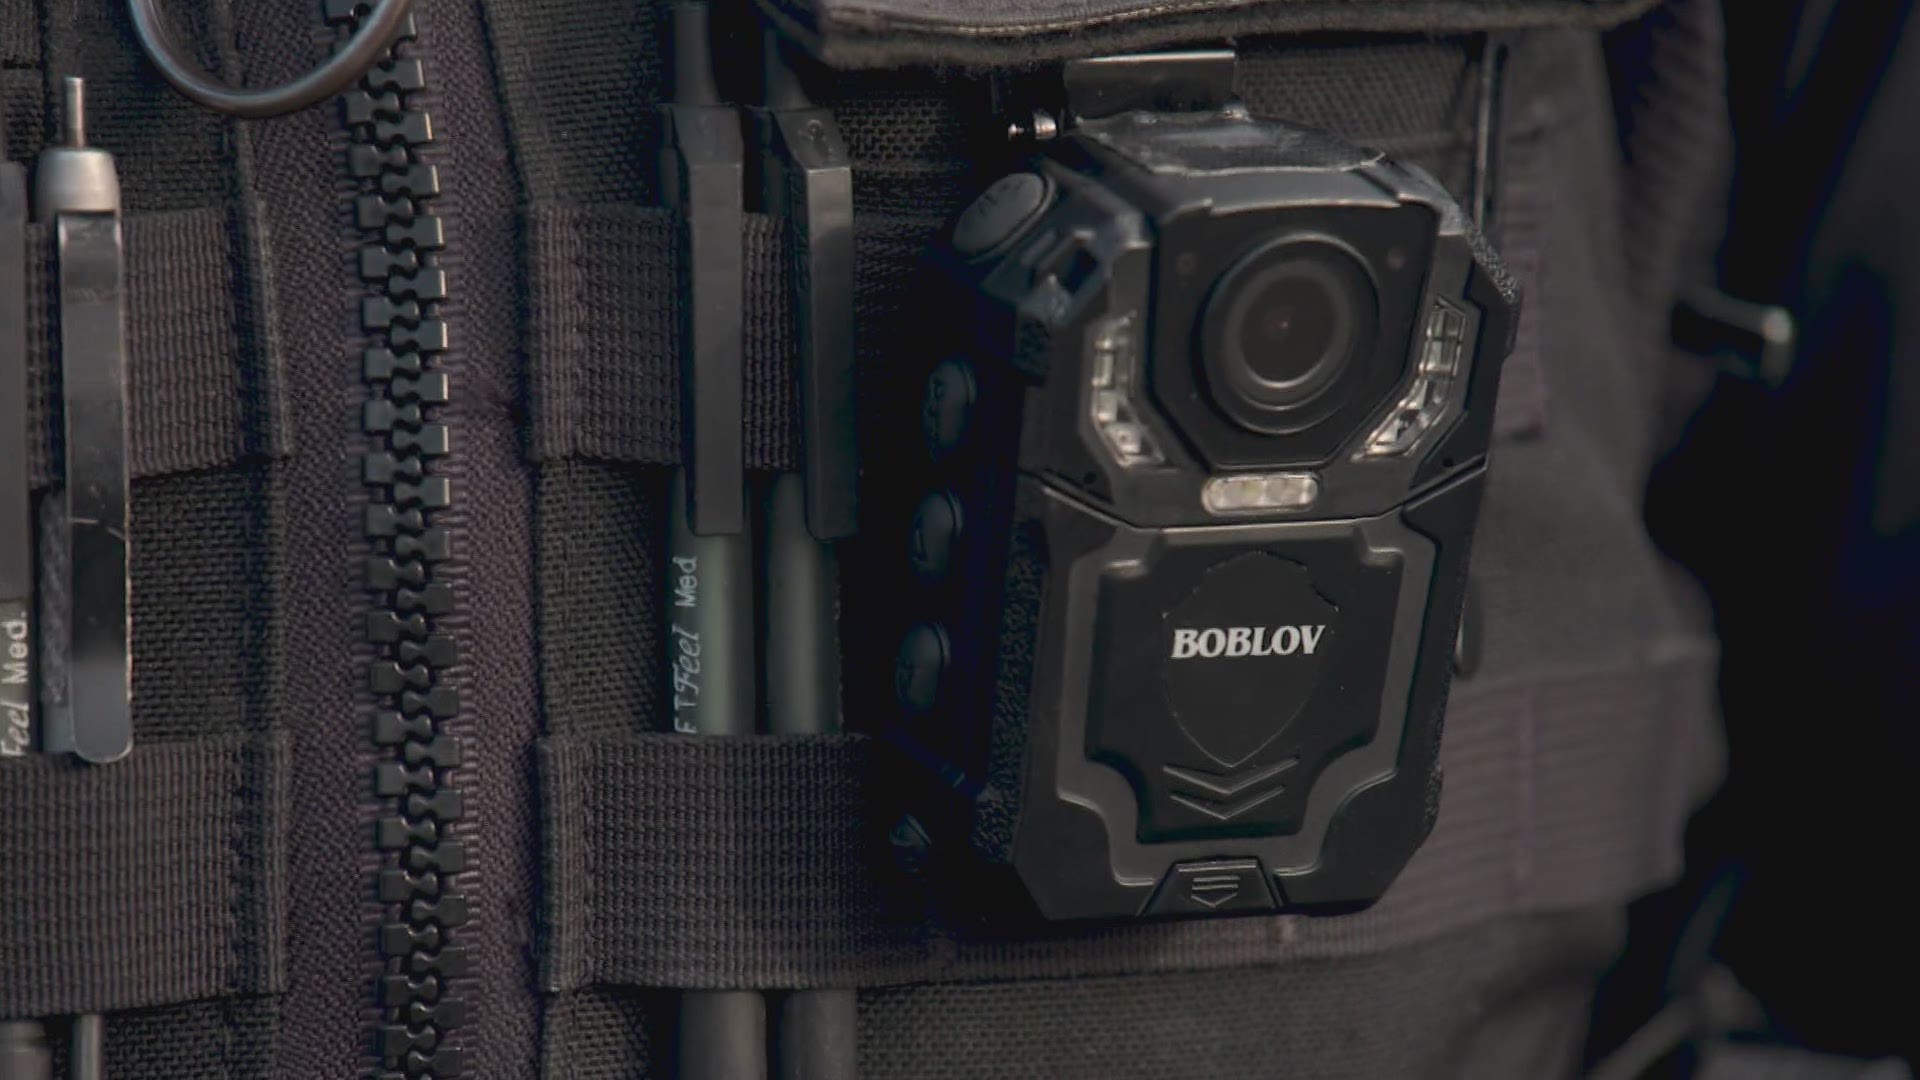 Most Washington law enforcement agencies have no body cameras to document officers' interactions. But state lawmakers don't plan to tackle the issue anytime soon.